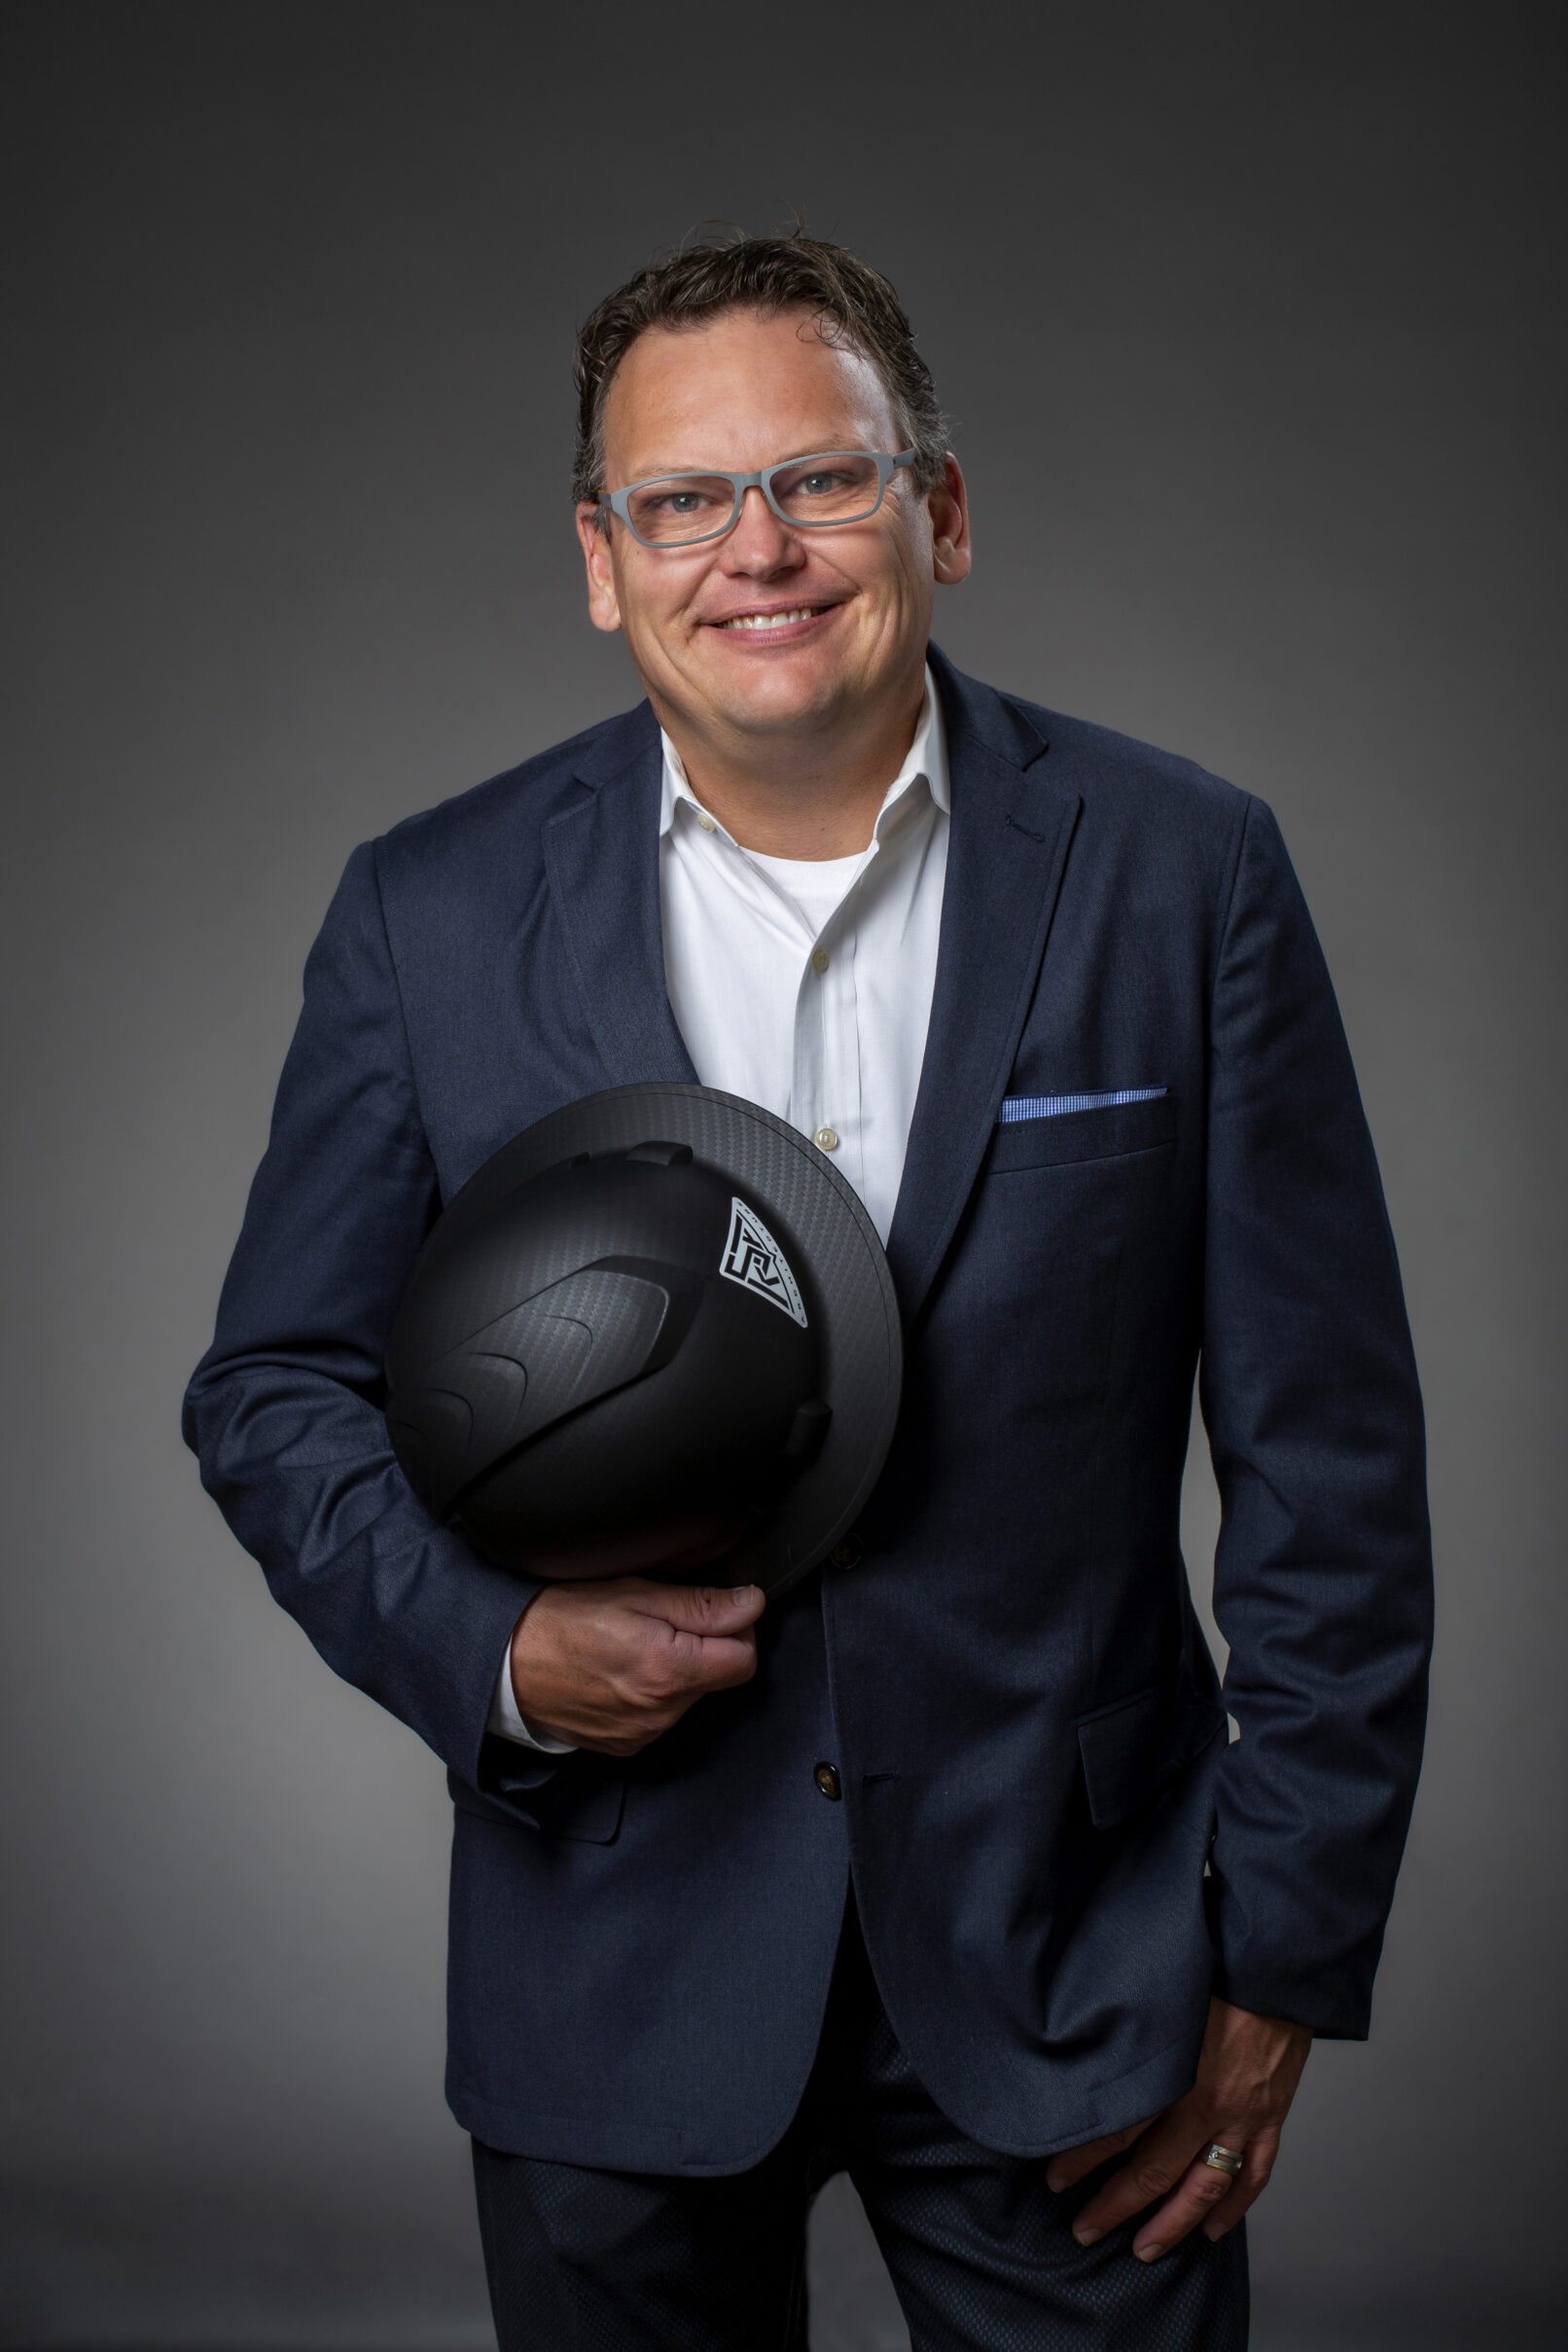 Studio portrait of a man in a suit holding a hardhat on a gray backgound.